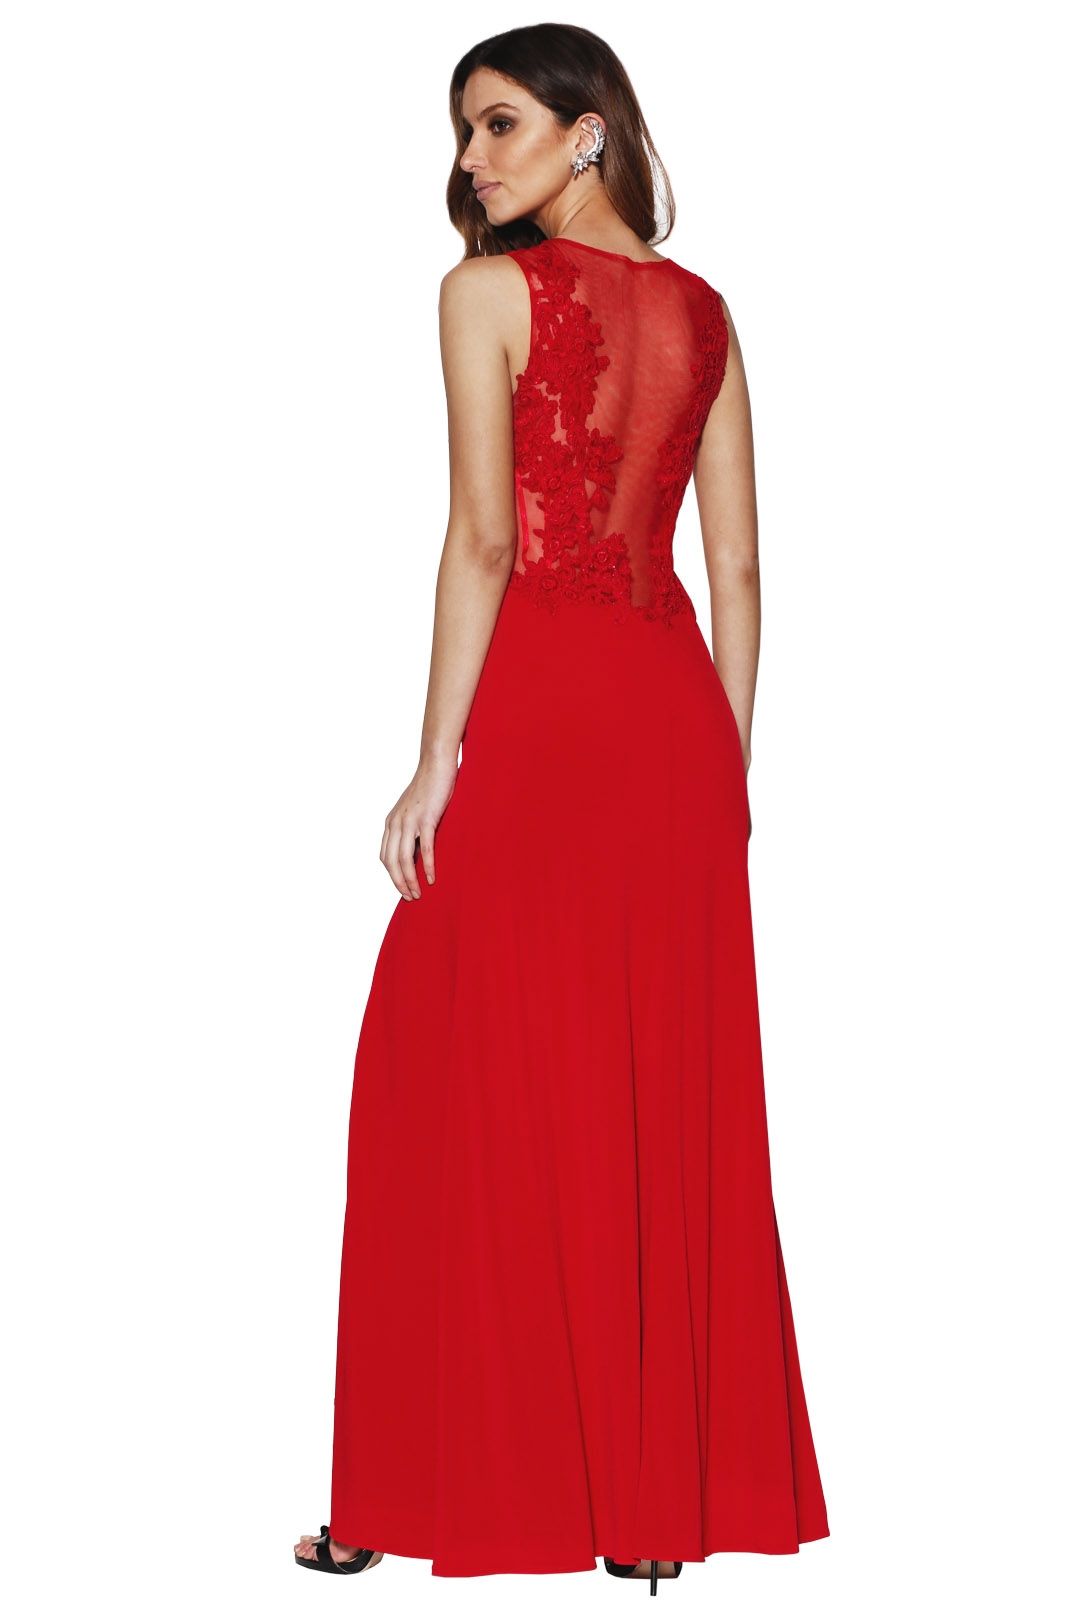 Grace and Hart - Starlet Gown - Red - Back